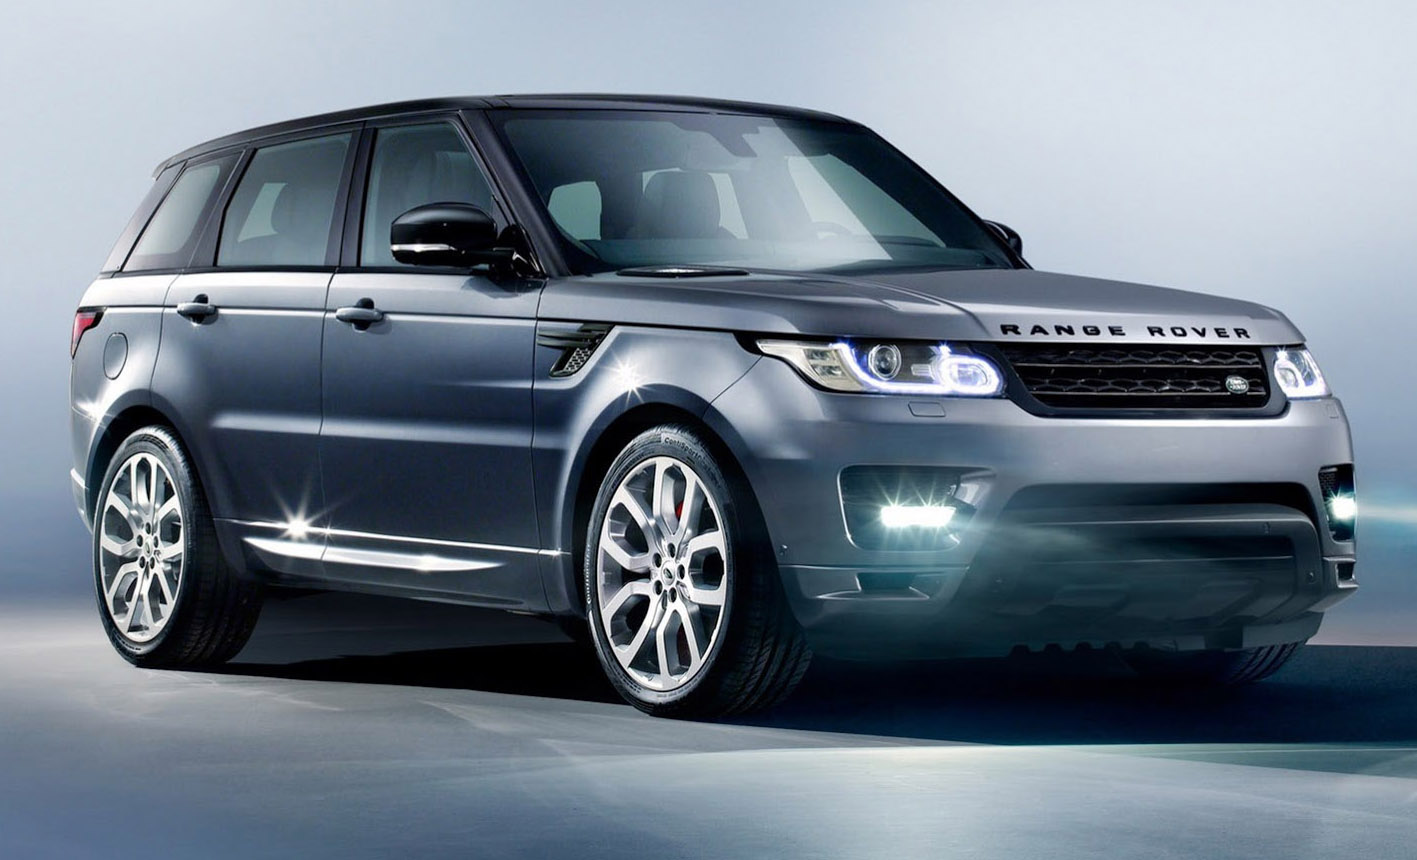 2014 Range Rover Sport Launched in India at Rs 1.09 crore